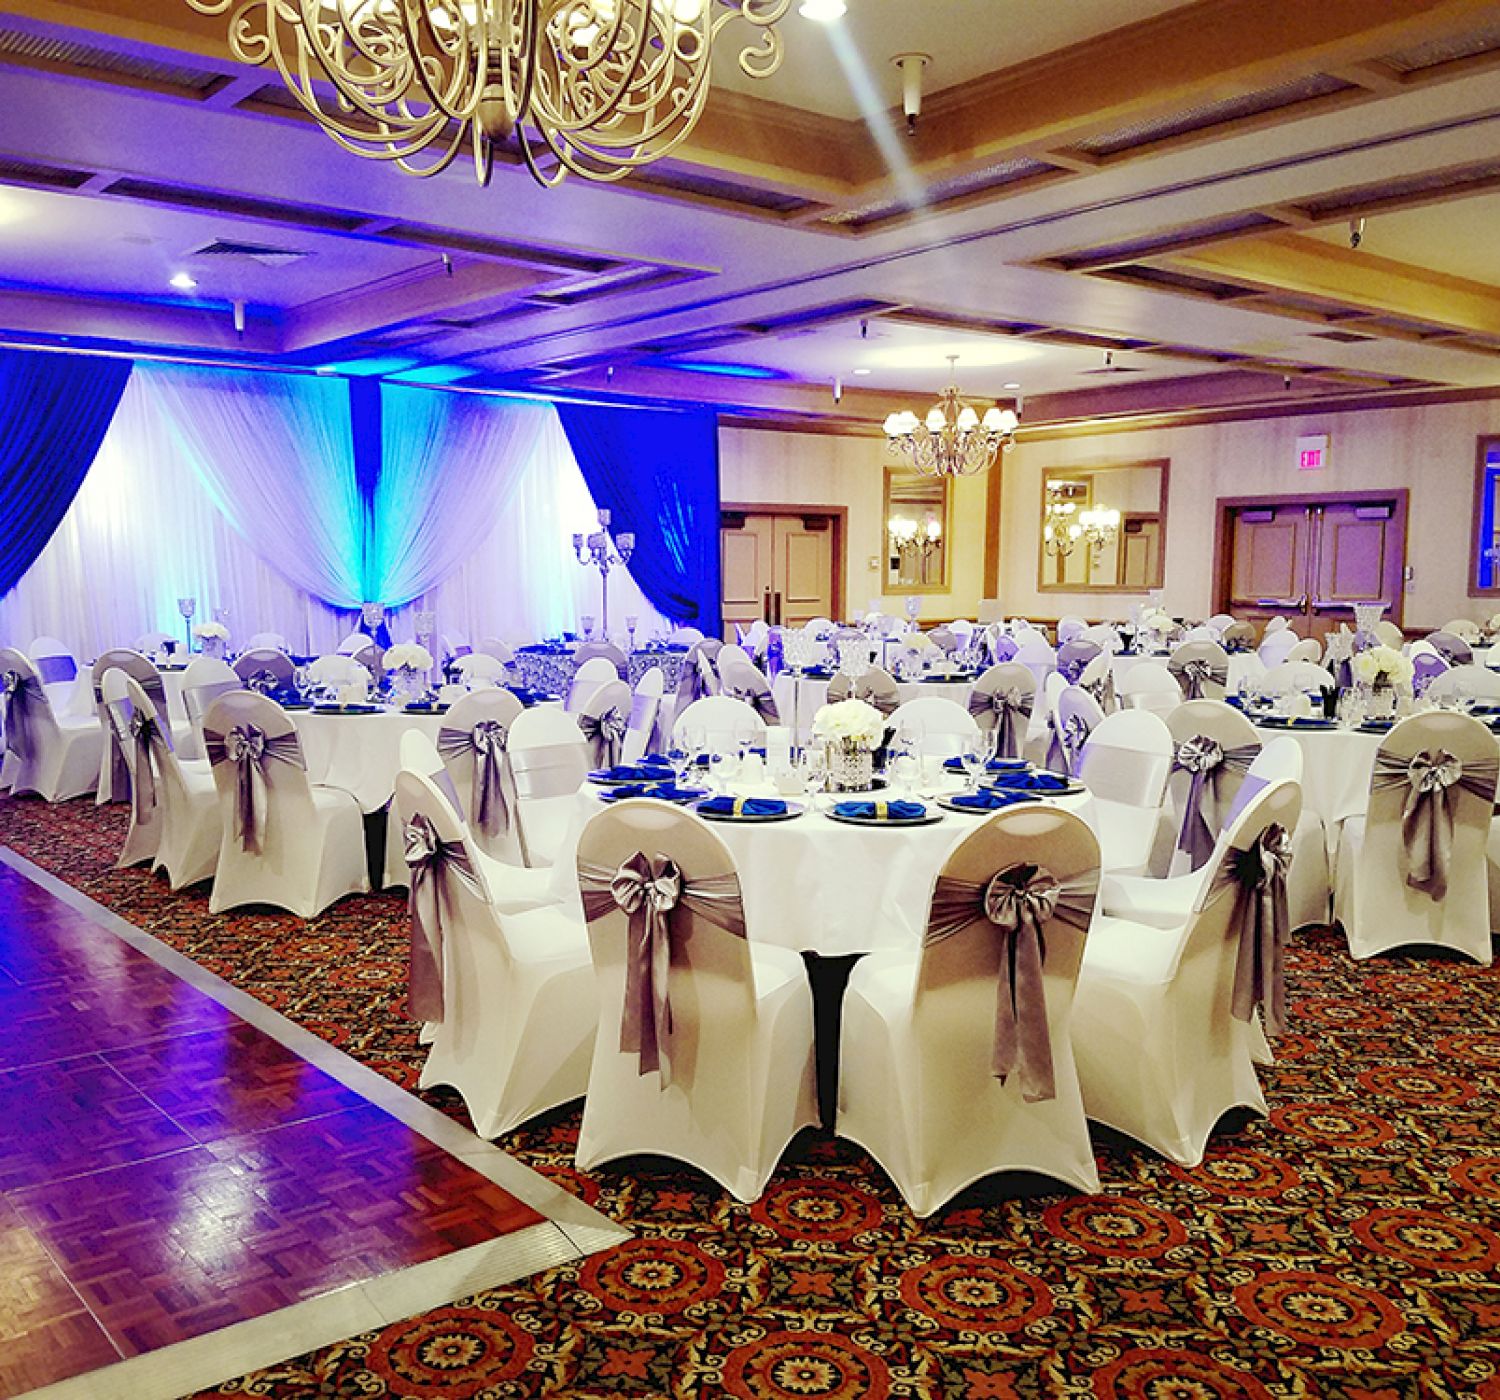 The image shows an elegantly decorated banquet hall with round tables covered in white cloth, adorned with chair bows and blue drapes, ready for an event.